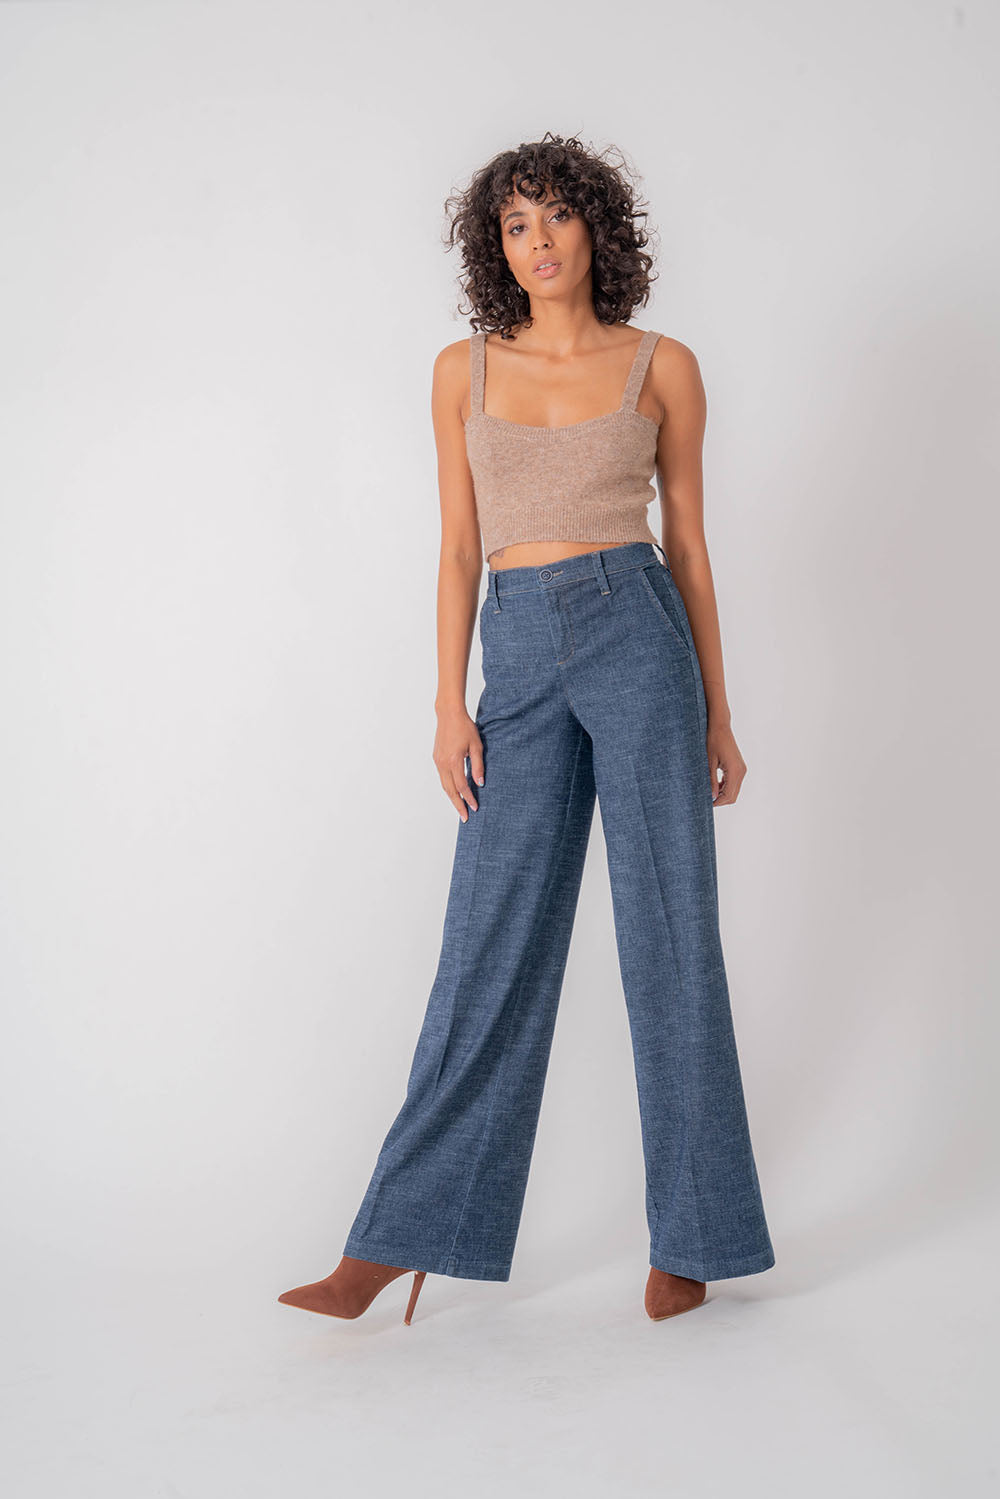 Wide Leg Jeans with Heart Print | Pomona and Peach